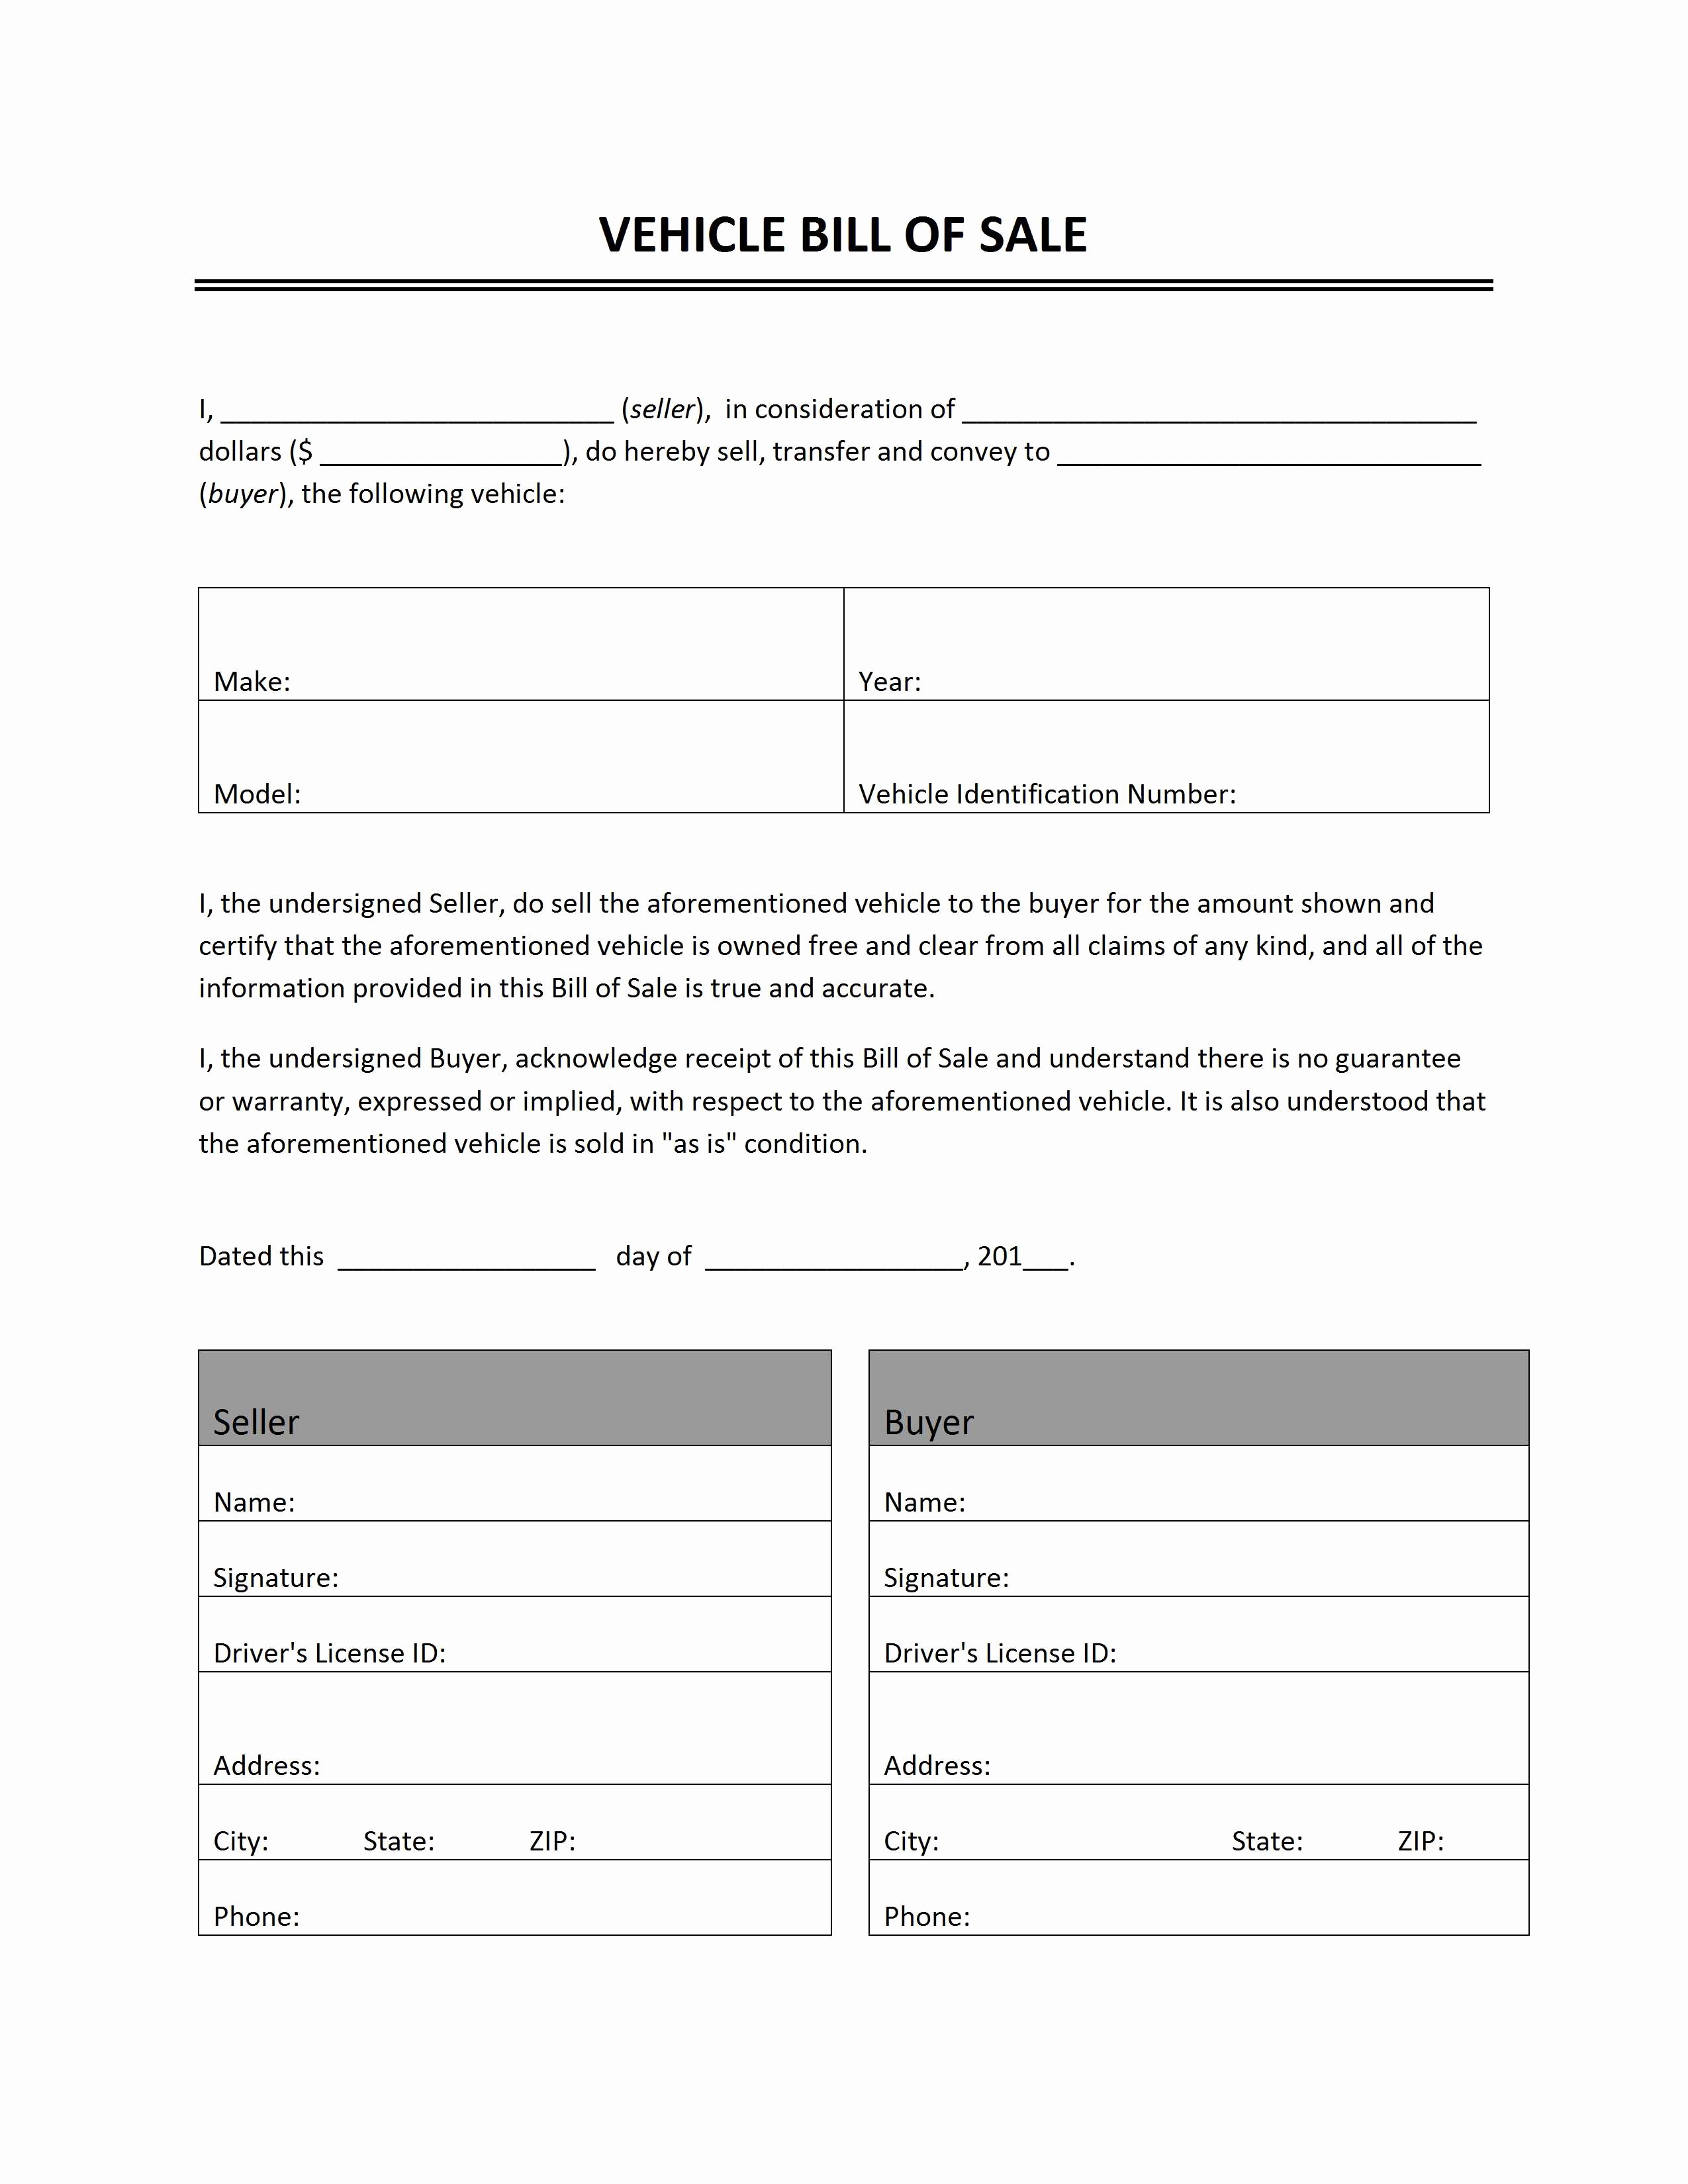 Vehicle Bill Of Sales Template New Vehicle Bill Of Sale